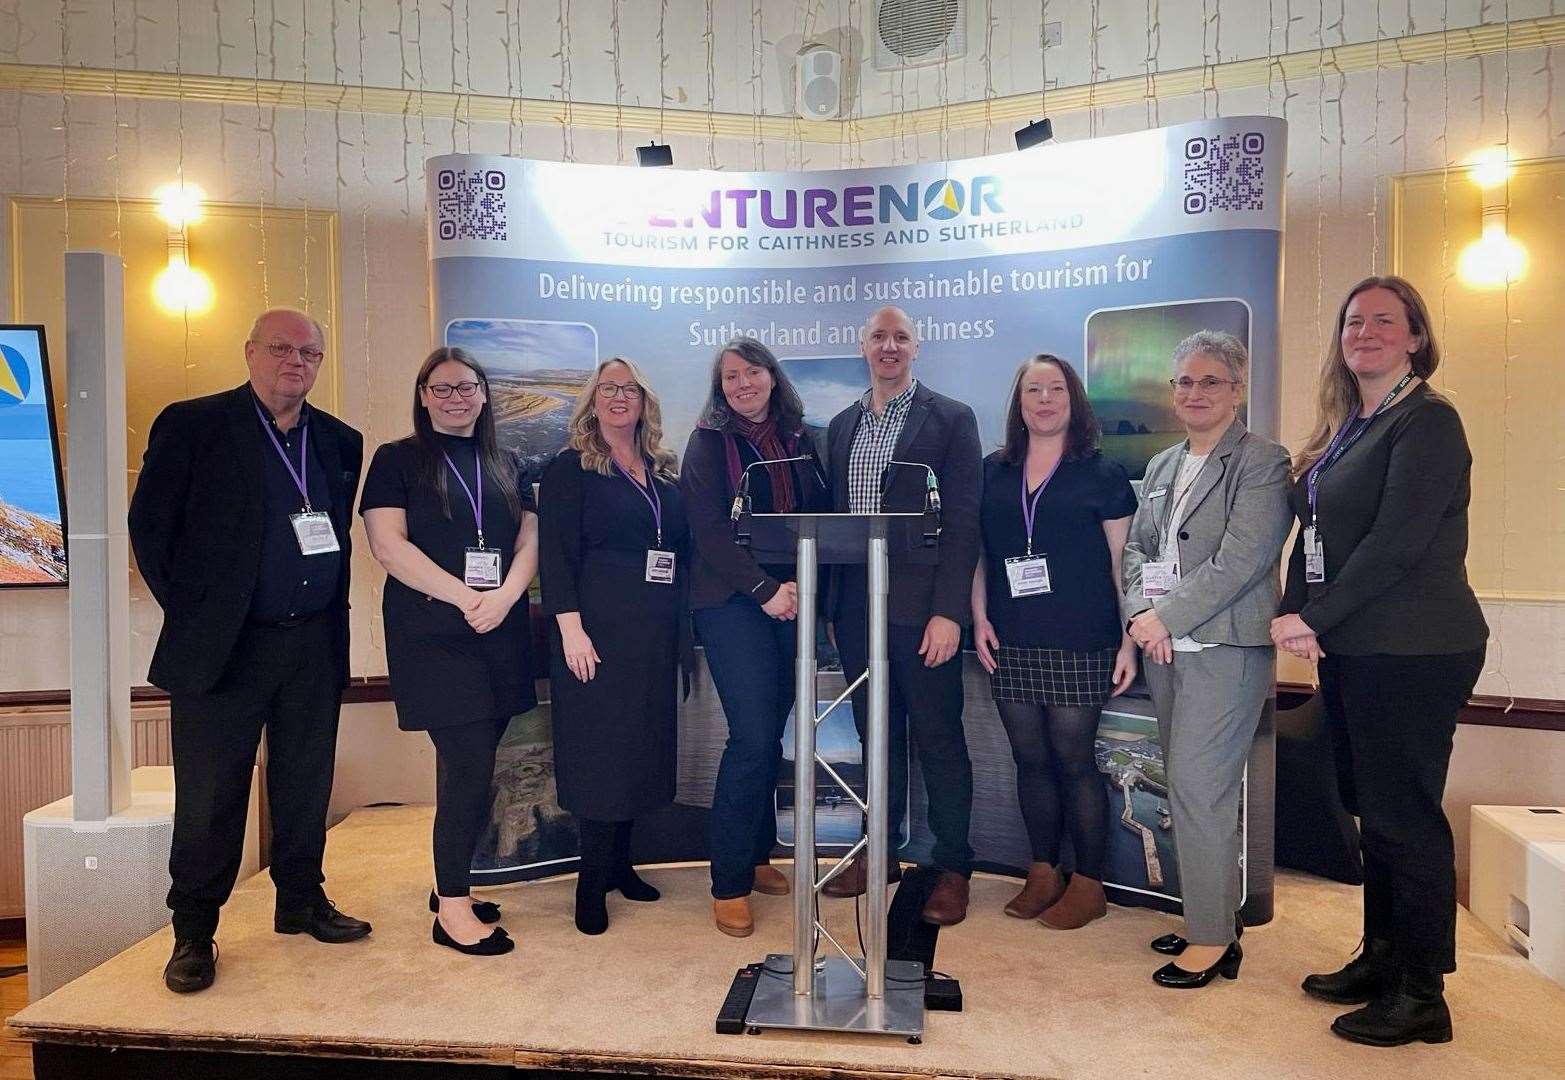 Key speakers at the Venture North tourism gathering in Mackays Hotel, Wick, on Thursday. From left: Ian Leith (John O'Groats Development Trust), Cassie McEwan (VisitScotland), Cathy Earnshaw (Venture North), Fiona Saywell (North West Highlands Geopark), Chris Taylor (VisitScotland), Bryony Robinson (John O'Groats Mill Trust), Trudy Morris (Developing the Young Workforce North Highland and Caithness Chamber of Commerce) and Cara Donald (NatureScot). Picture: Niamh Ross